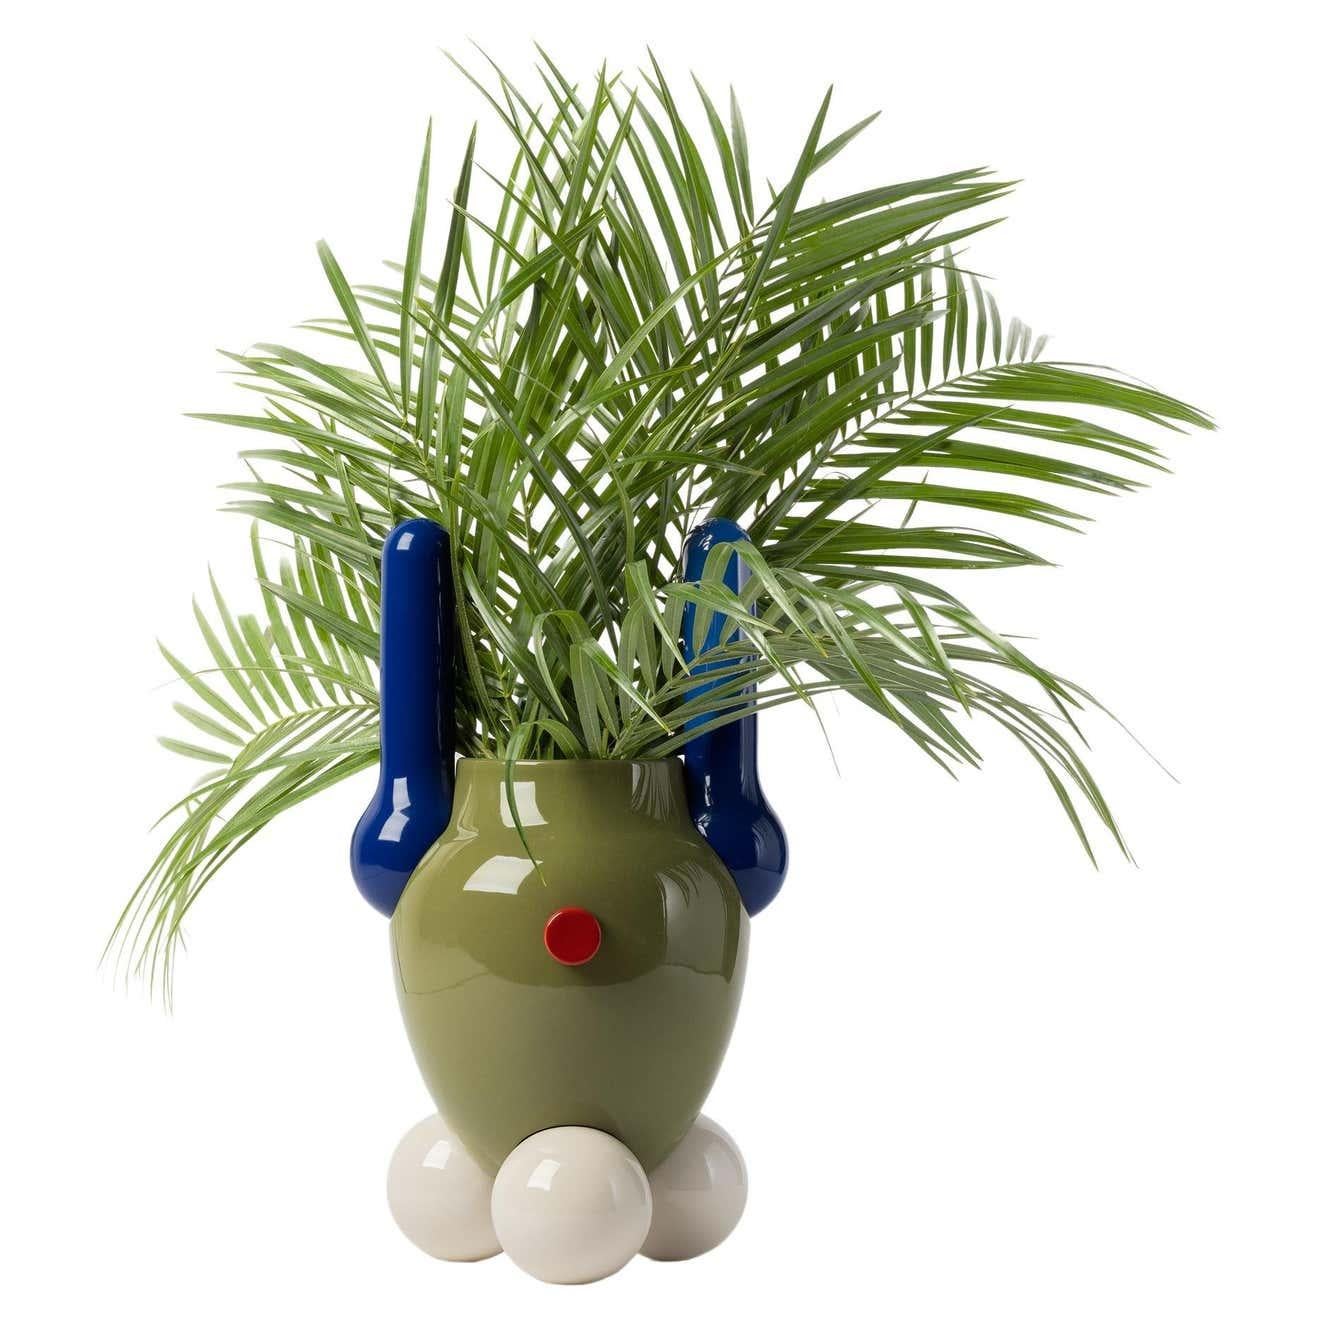 Contemporary Glazed Ceramic Explorer Vase No.1

Materials: 
Ceramic

Dimensions: 
D 23 cm x W 23 cm x H 40 cm

The Showtime Vases are just as current as when we launched them over 10 years ago. They are little decorative sculptures that